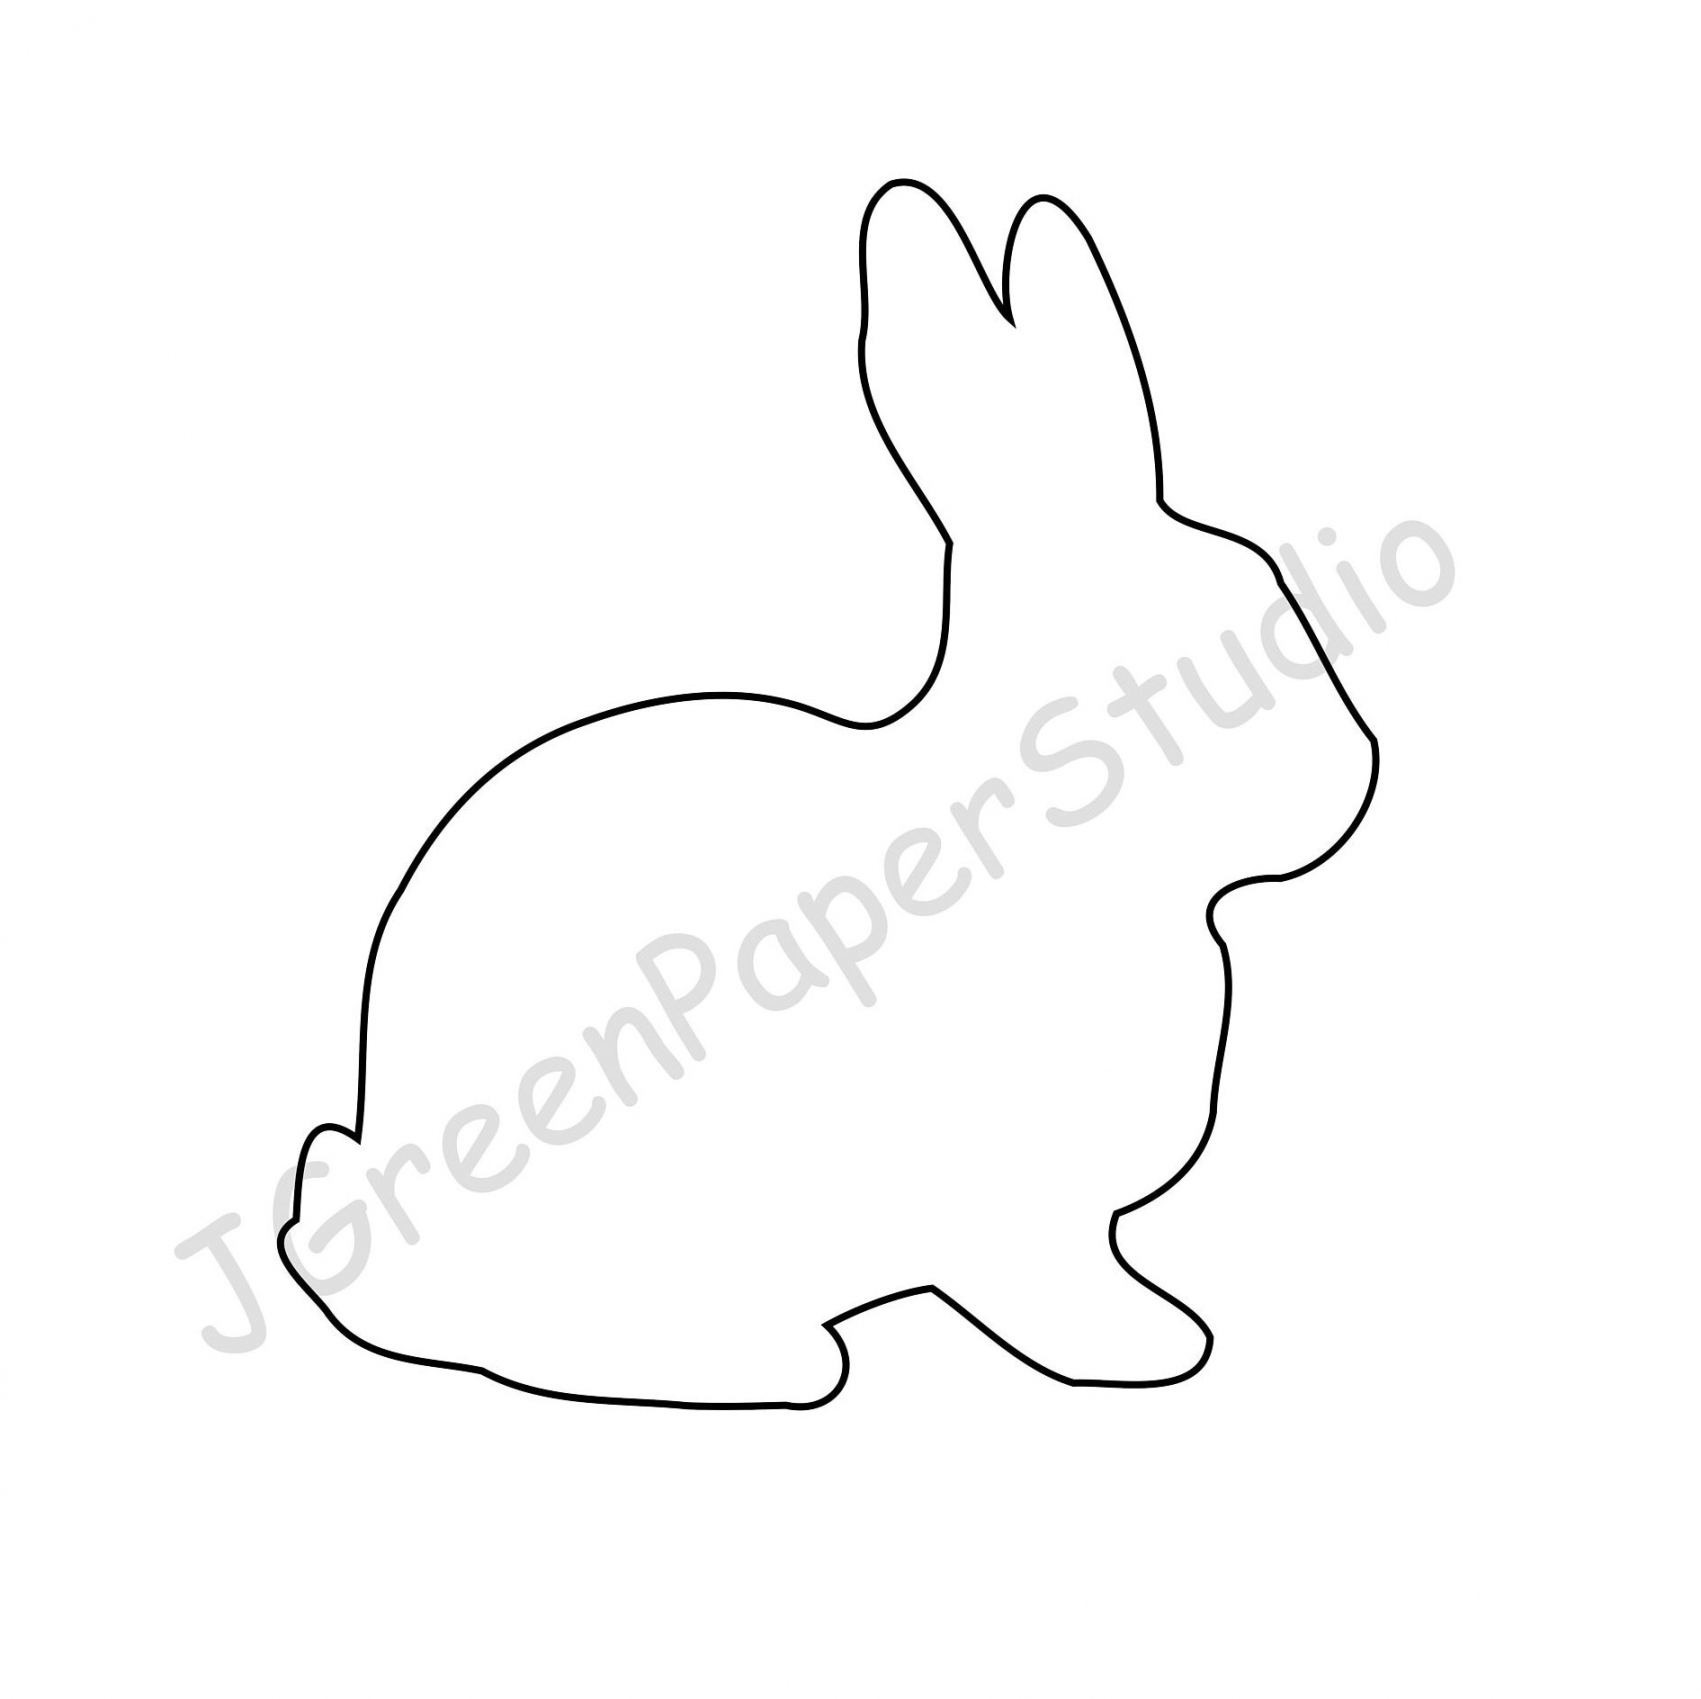 Printable Rabbit Template-PDF Digital Download Bunny Kids Coloring Page  Kids Crafts Stencil  inch Easter Bunny DIY Craft - FREE Printables - Rabbit Template